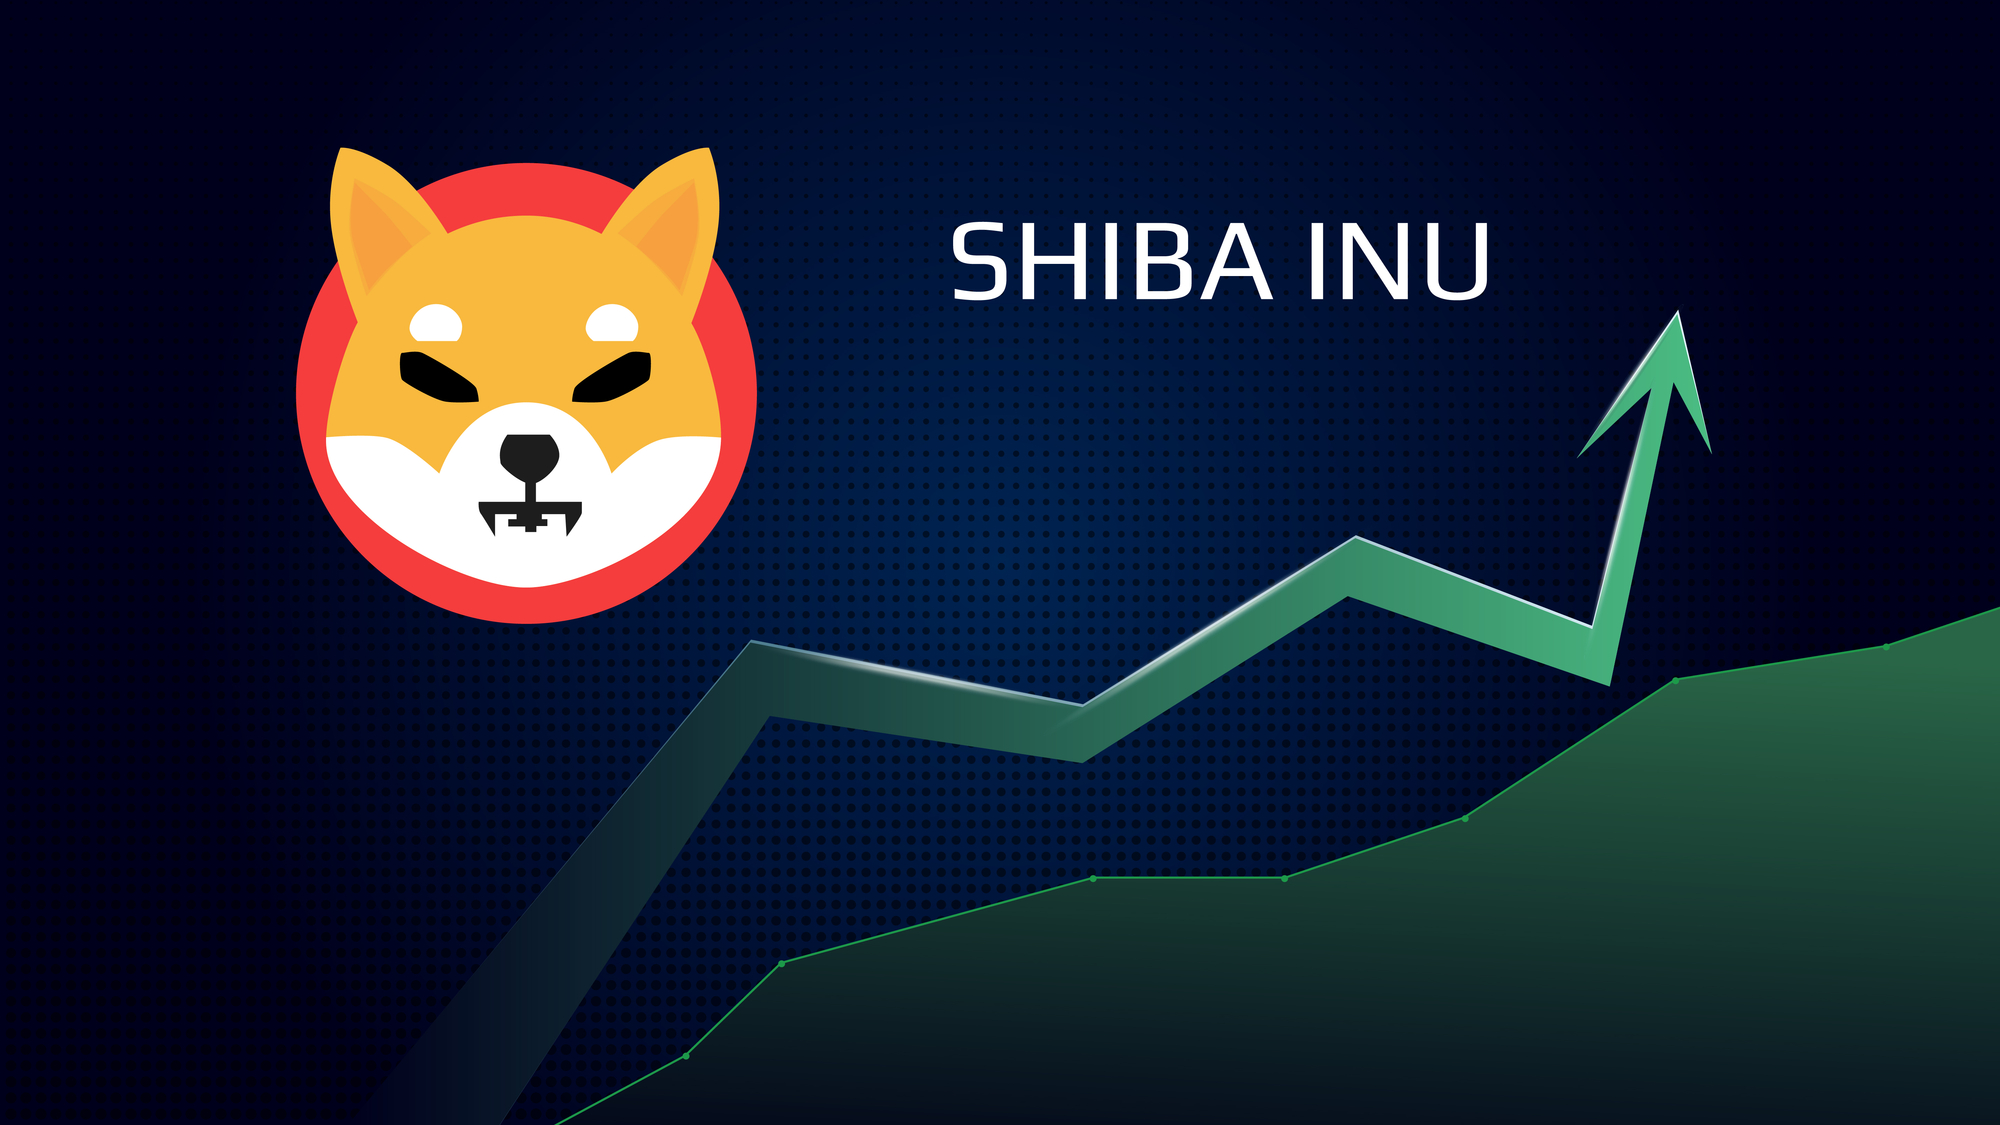 How to Invest In Shiba Inu (And Is It Too Late)?